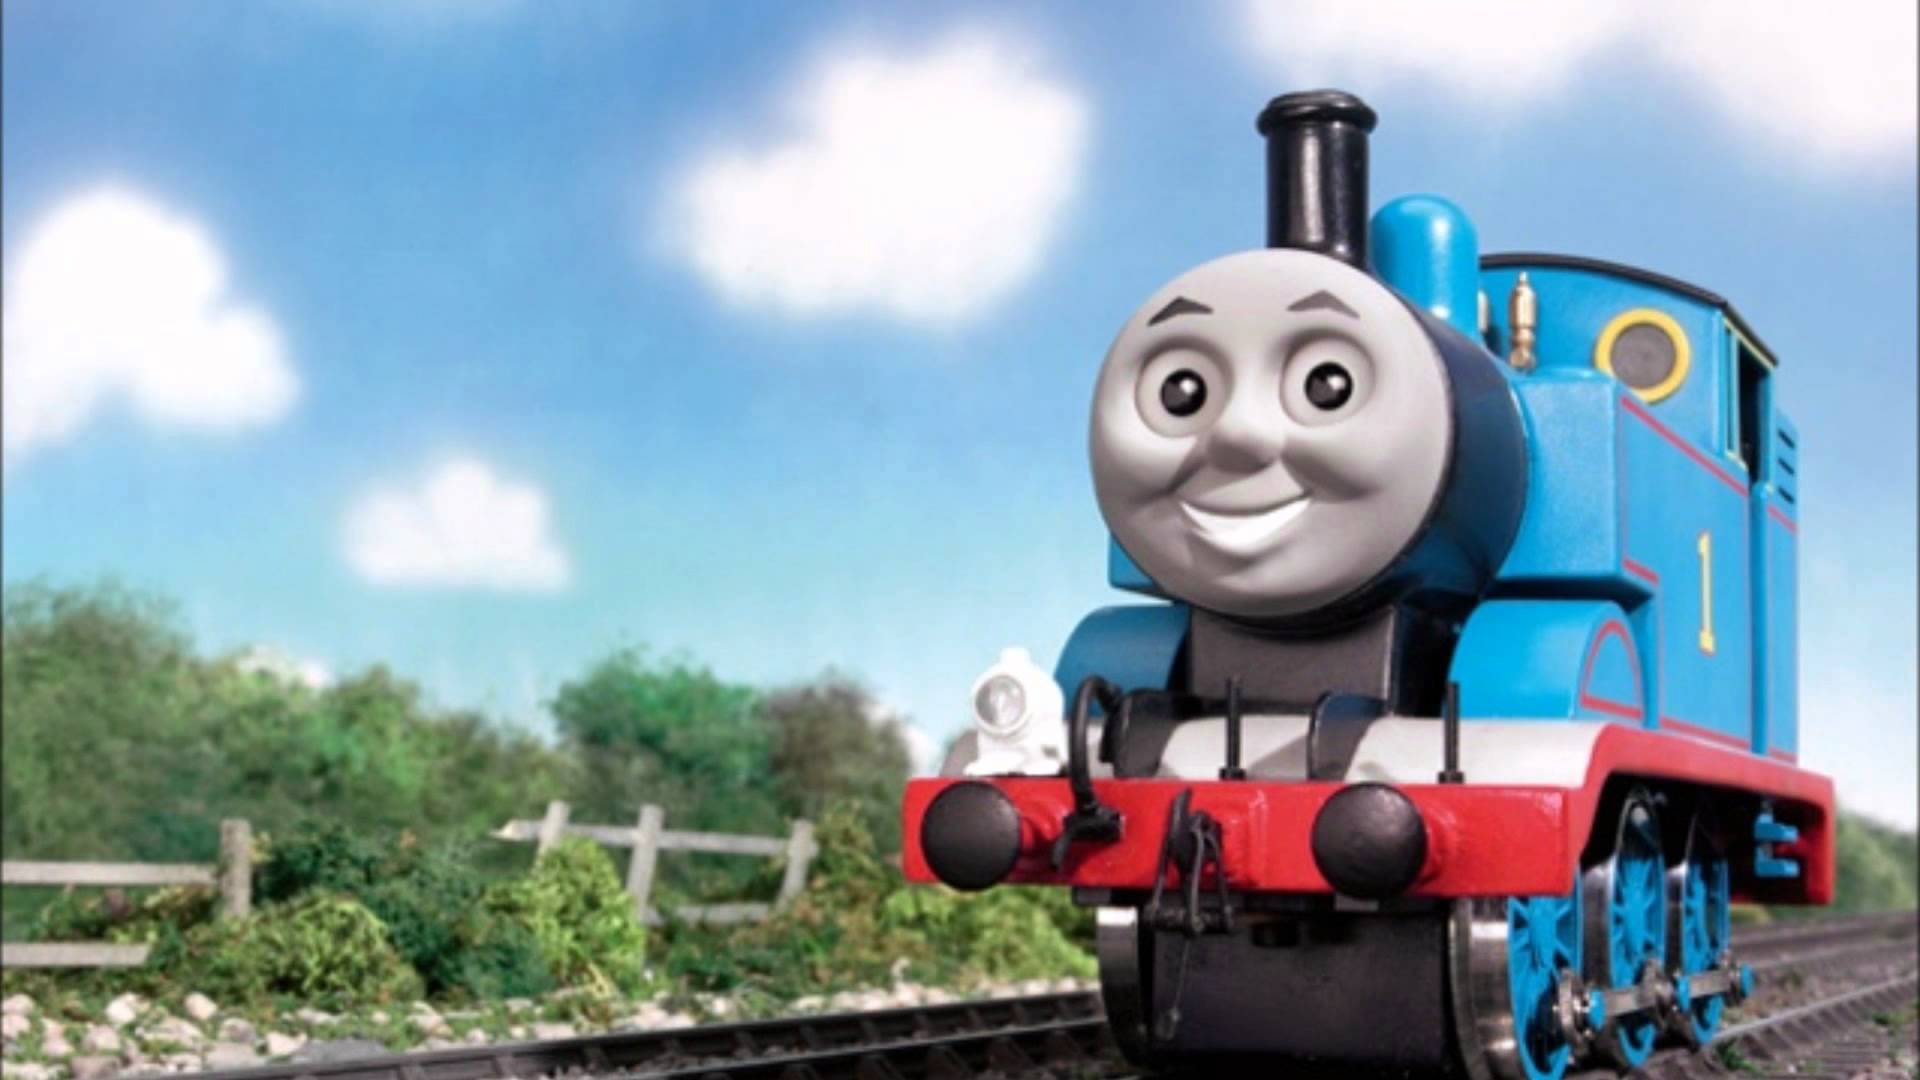 Dan Harmon to develop Thomas the Tank Engine for adults